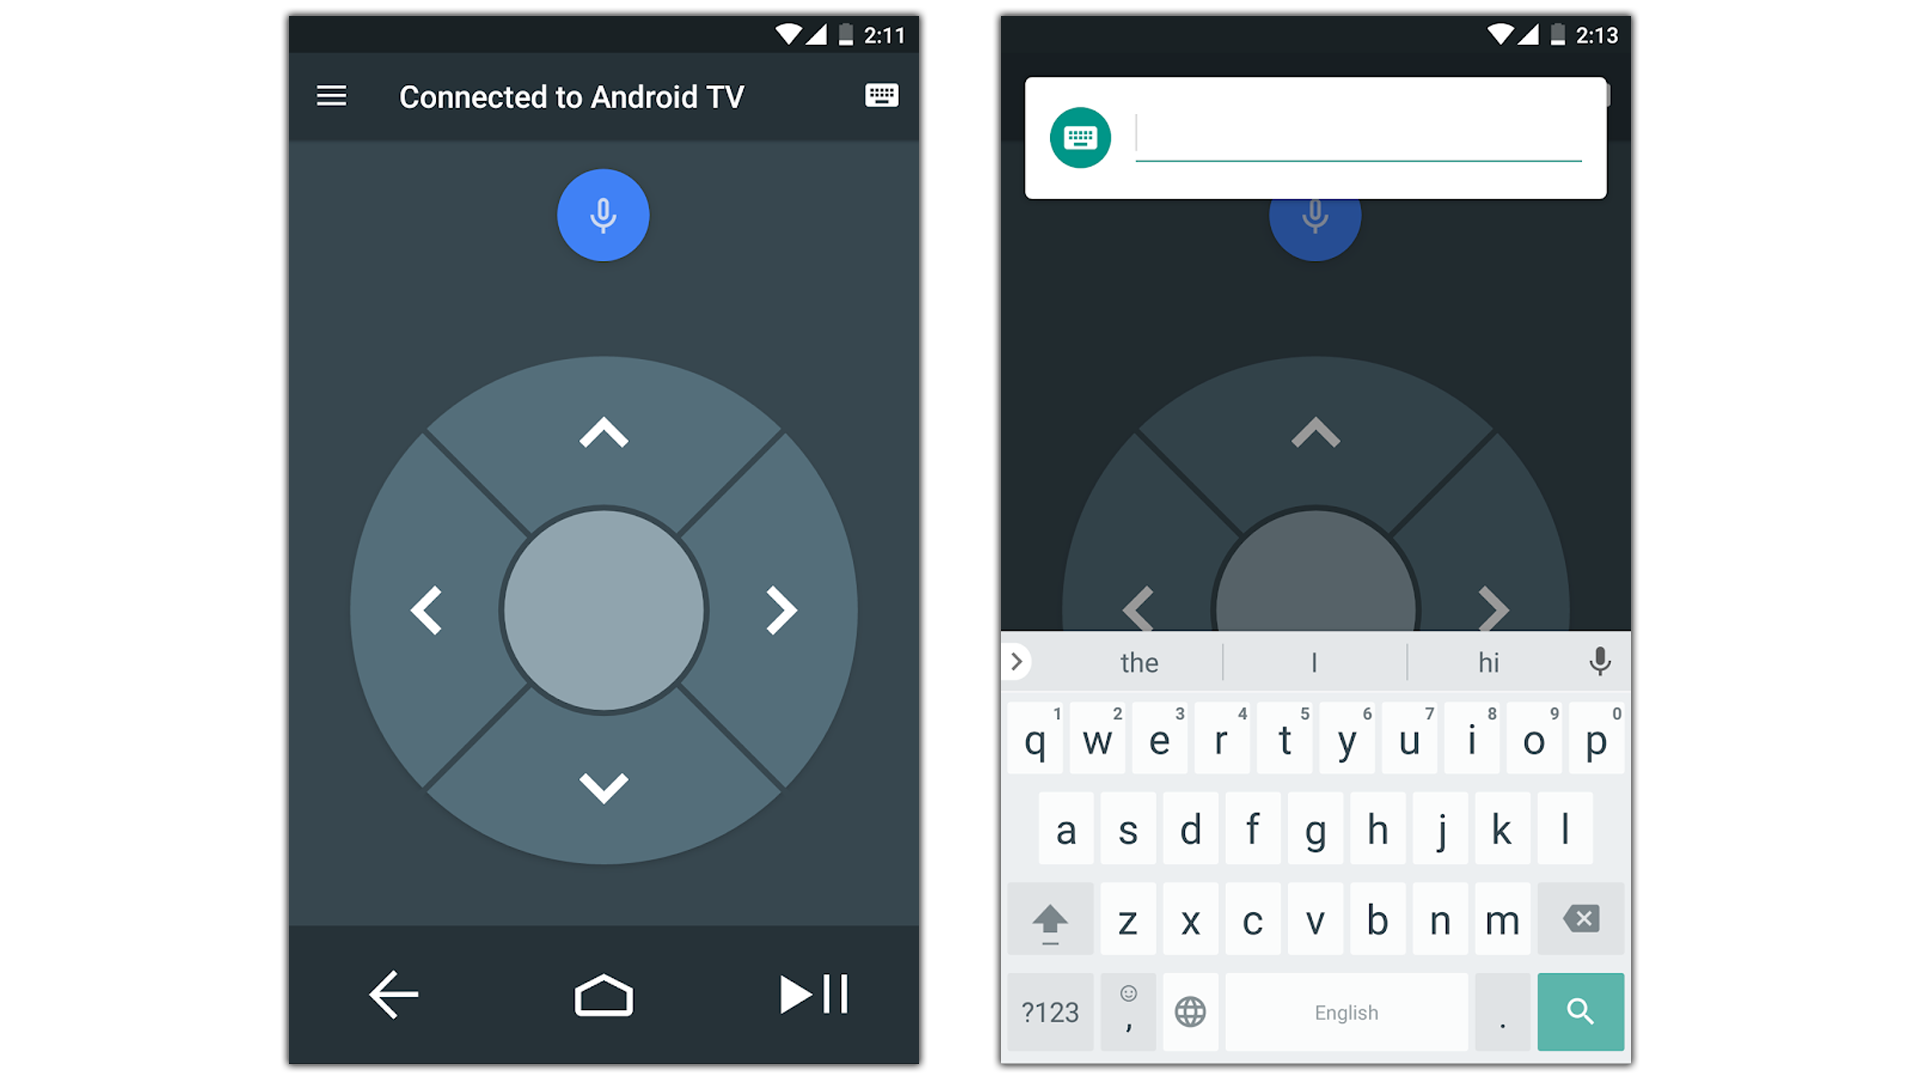 Screenshots of the ANdroid TV Remote Control app.